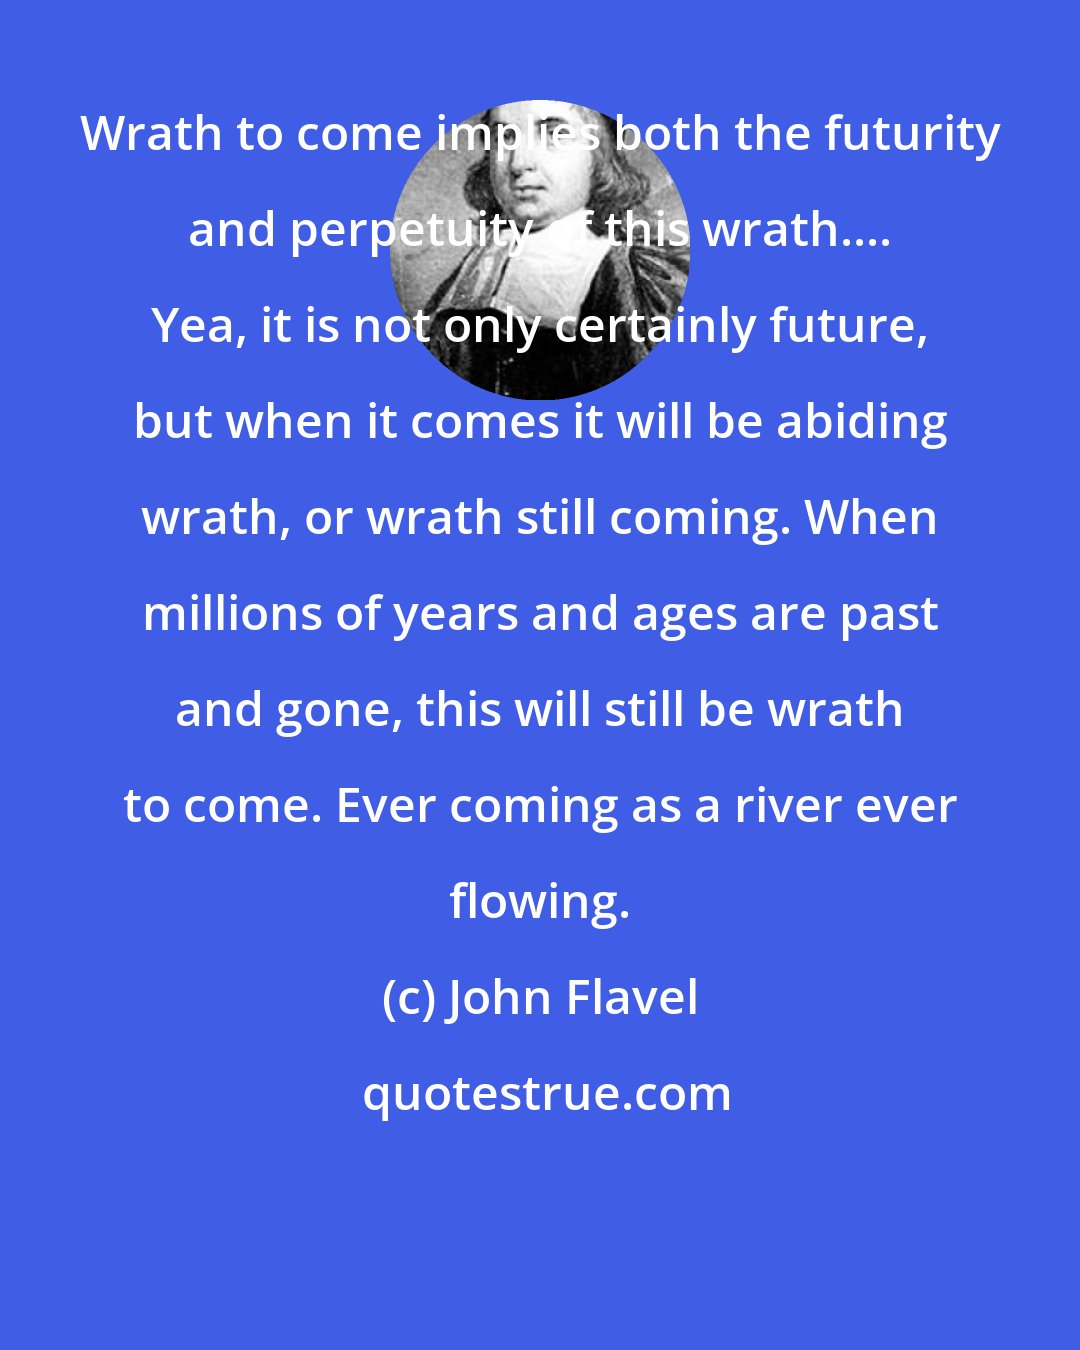 John Flavel: Wrath to come implies both the futurity and perpetuity of this wrath.... Yea, it is not only certainly future, but when it comes it will be abiding wrath, or wrath still coming. When millions of years and ages are past and gone, this will still be wrath to come. Ever coming as a river ever flowing.